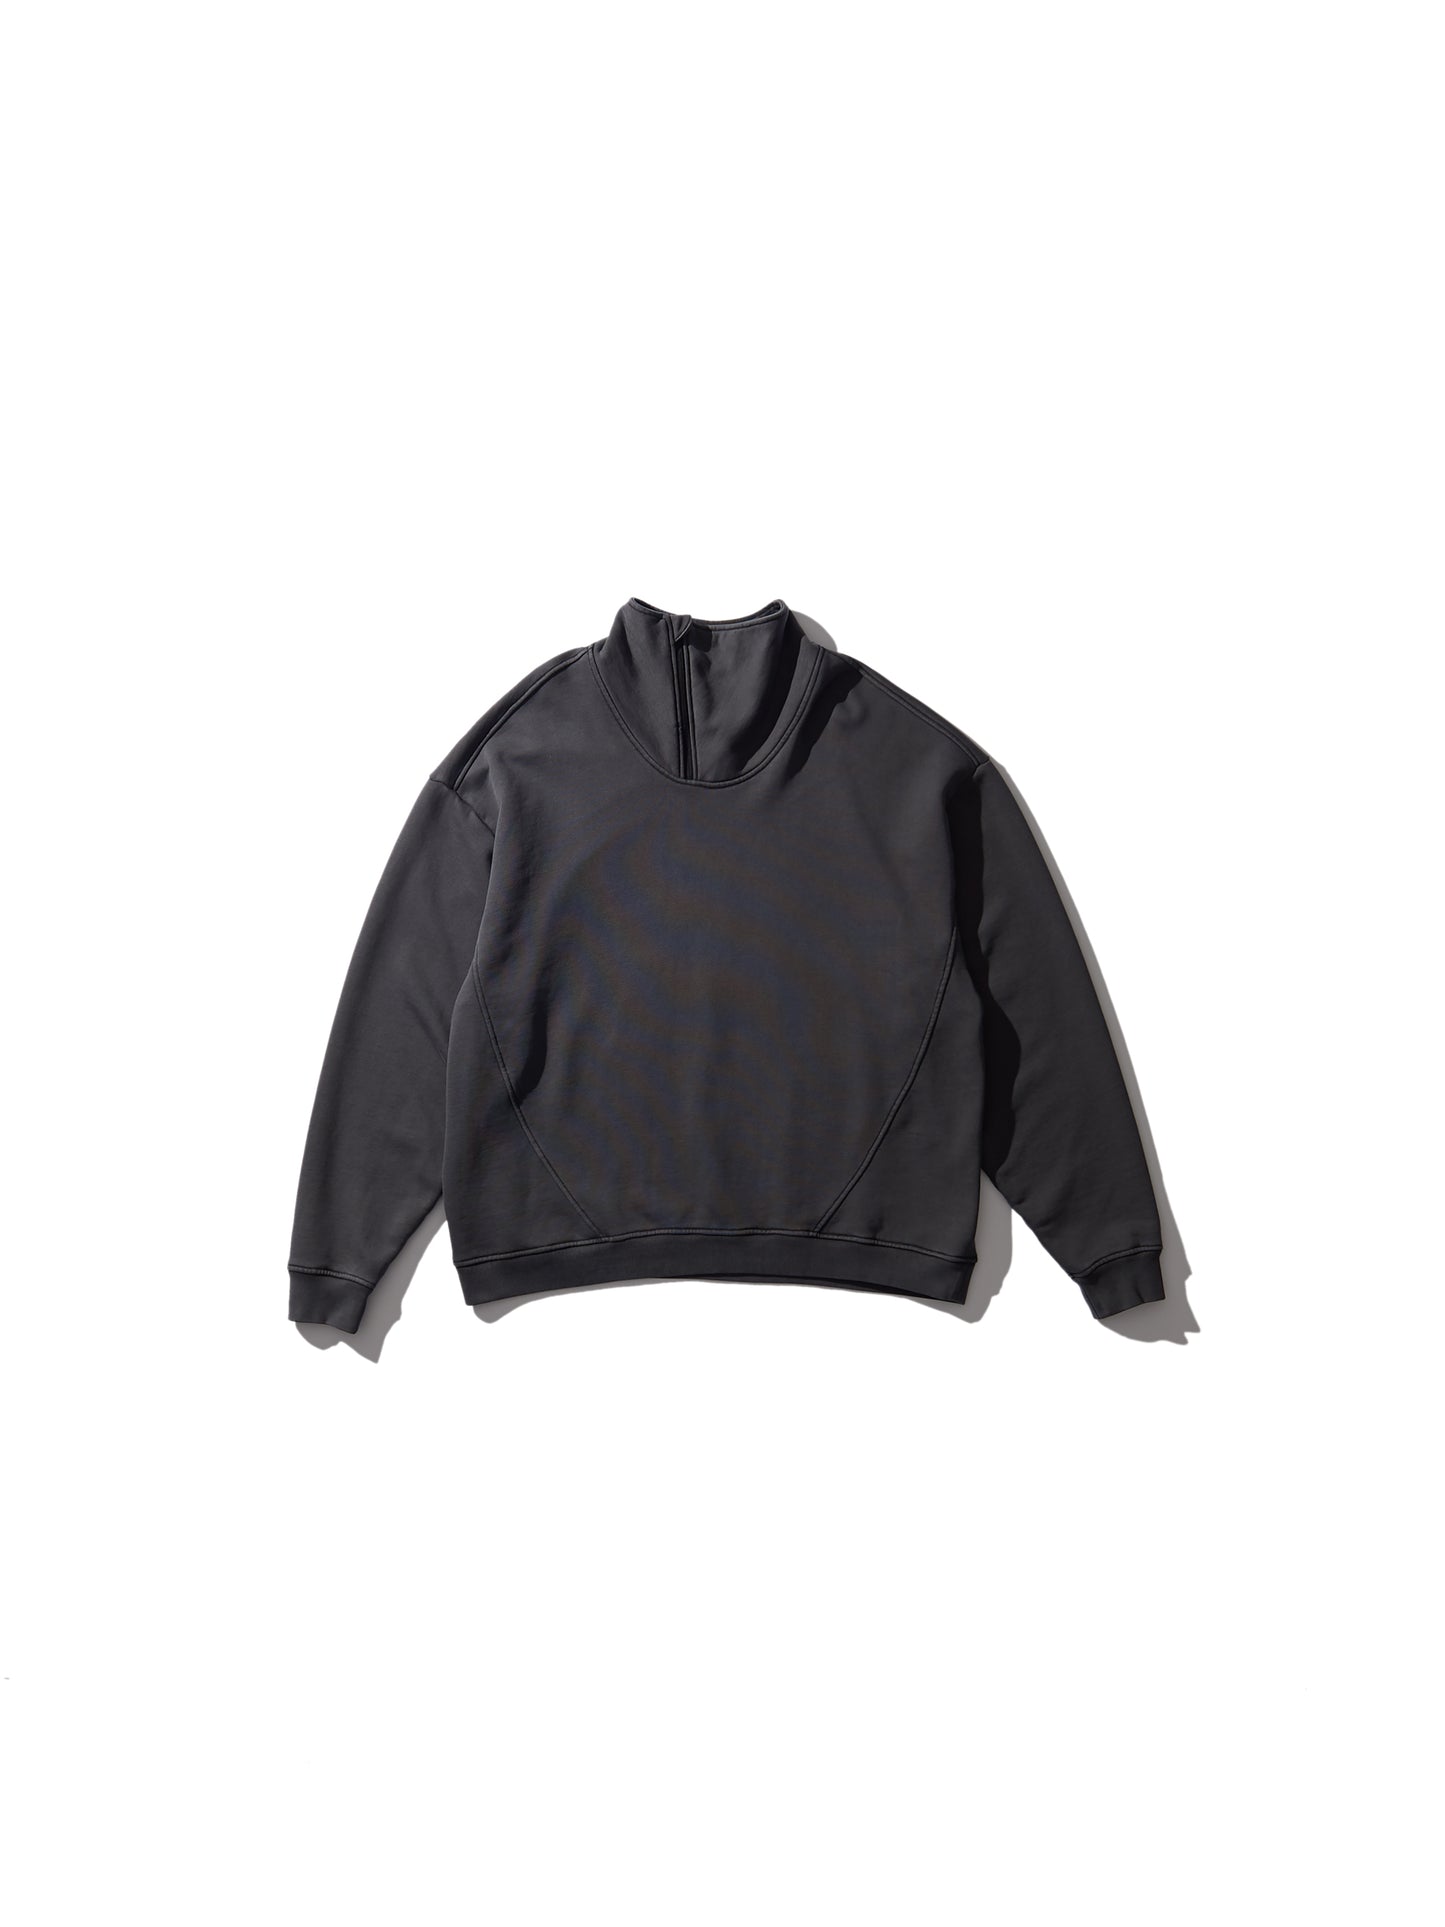 RESEARCHED ZIP UP PULLOVER / 16oz C.FLEECE